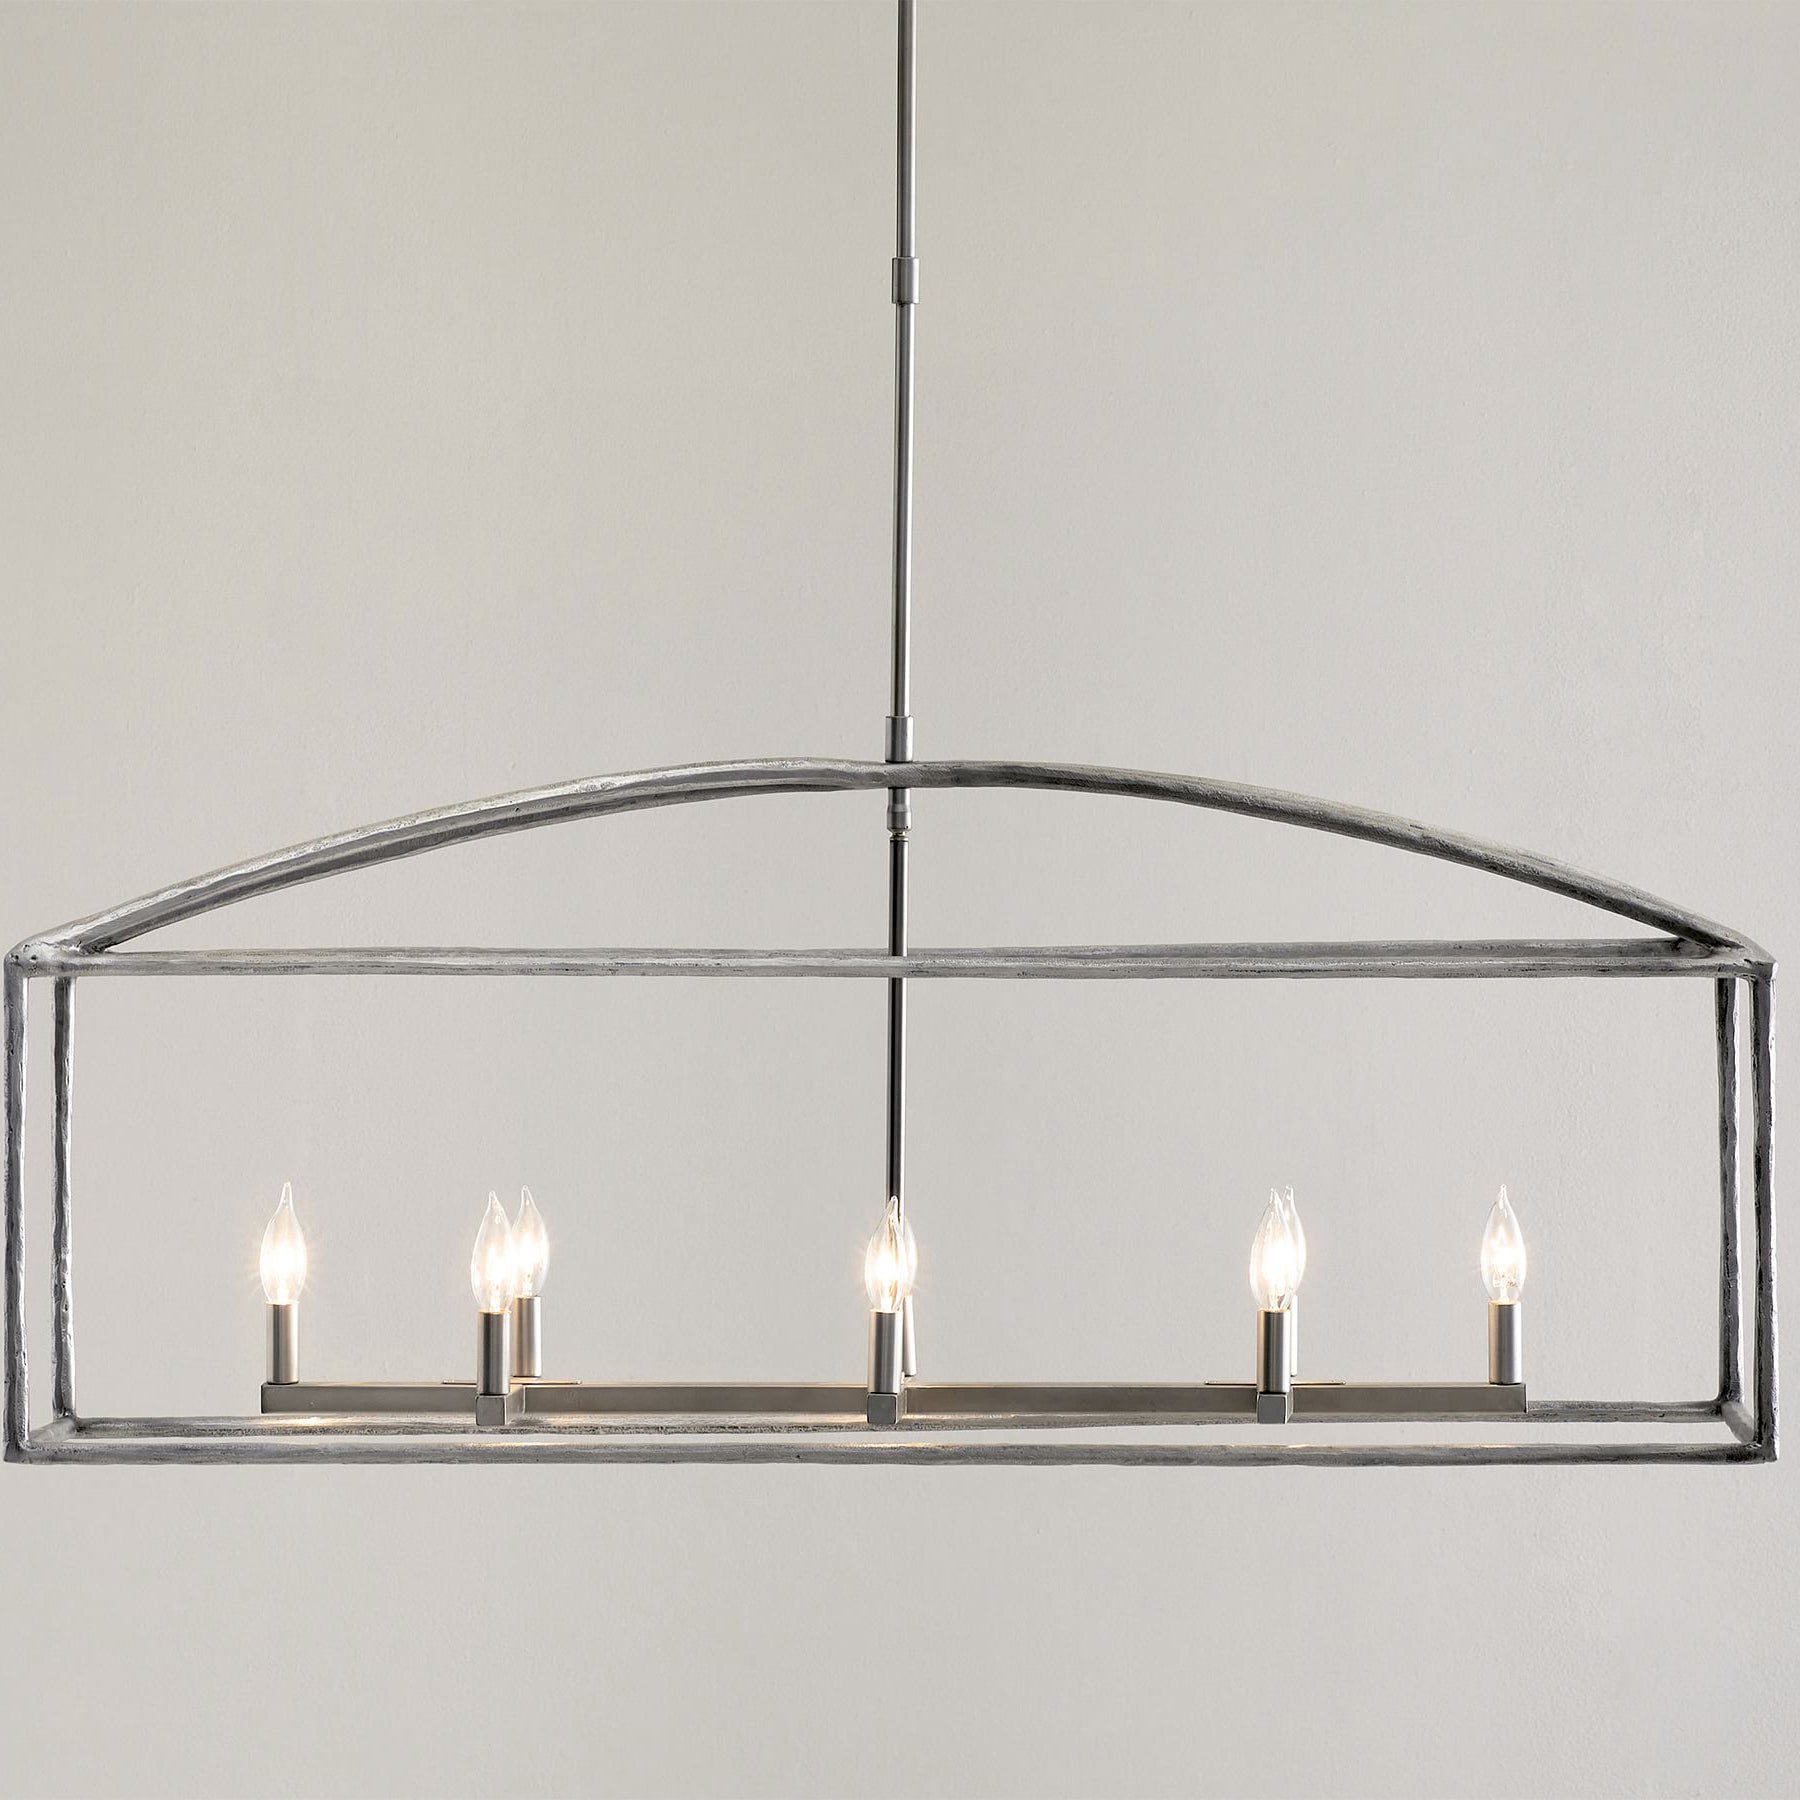 ForgeCurve Dining Chandelier - Modern Hand-Forged Chandelier with Organic Curves